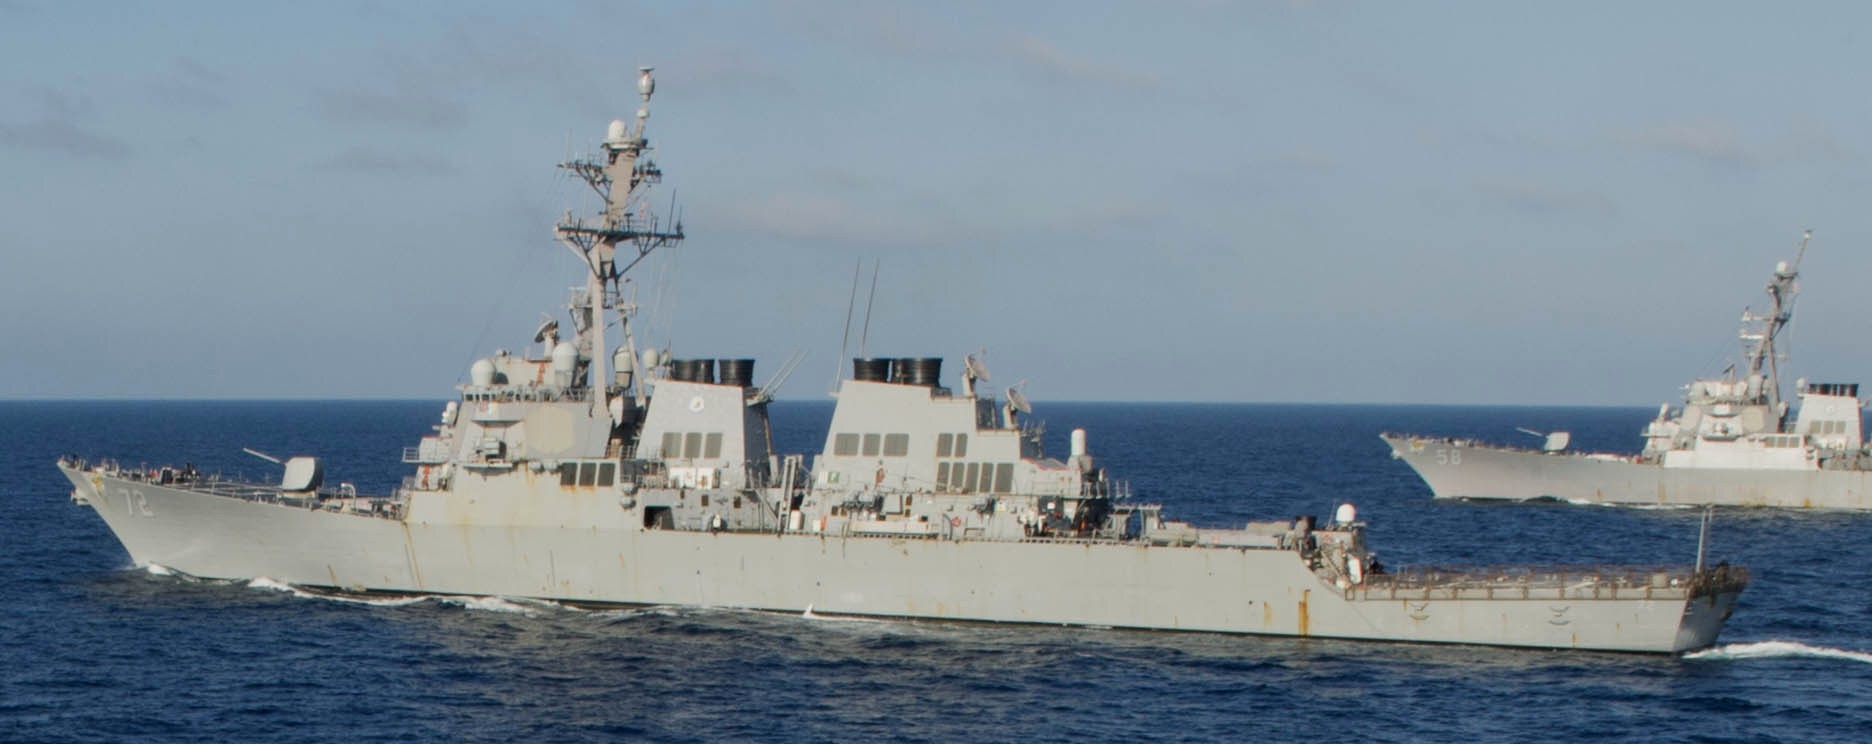 ddg-72 uss mahan guided missile destroyer arleigh burke class aegis bmd 13